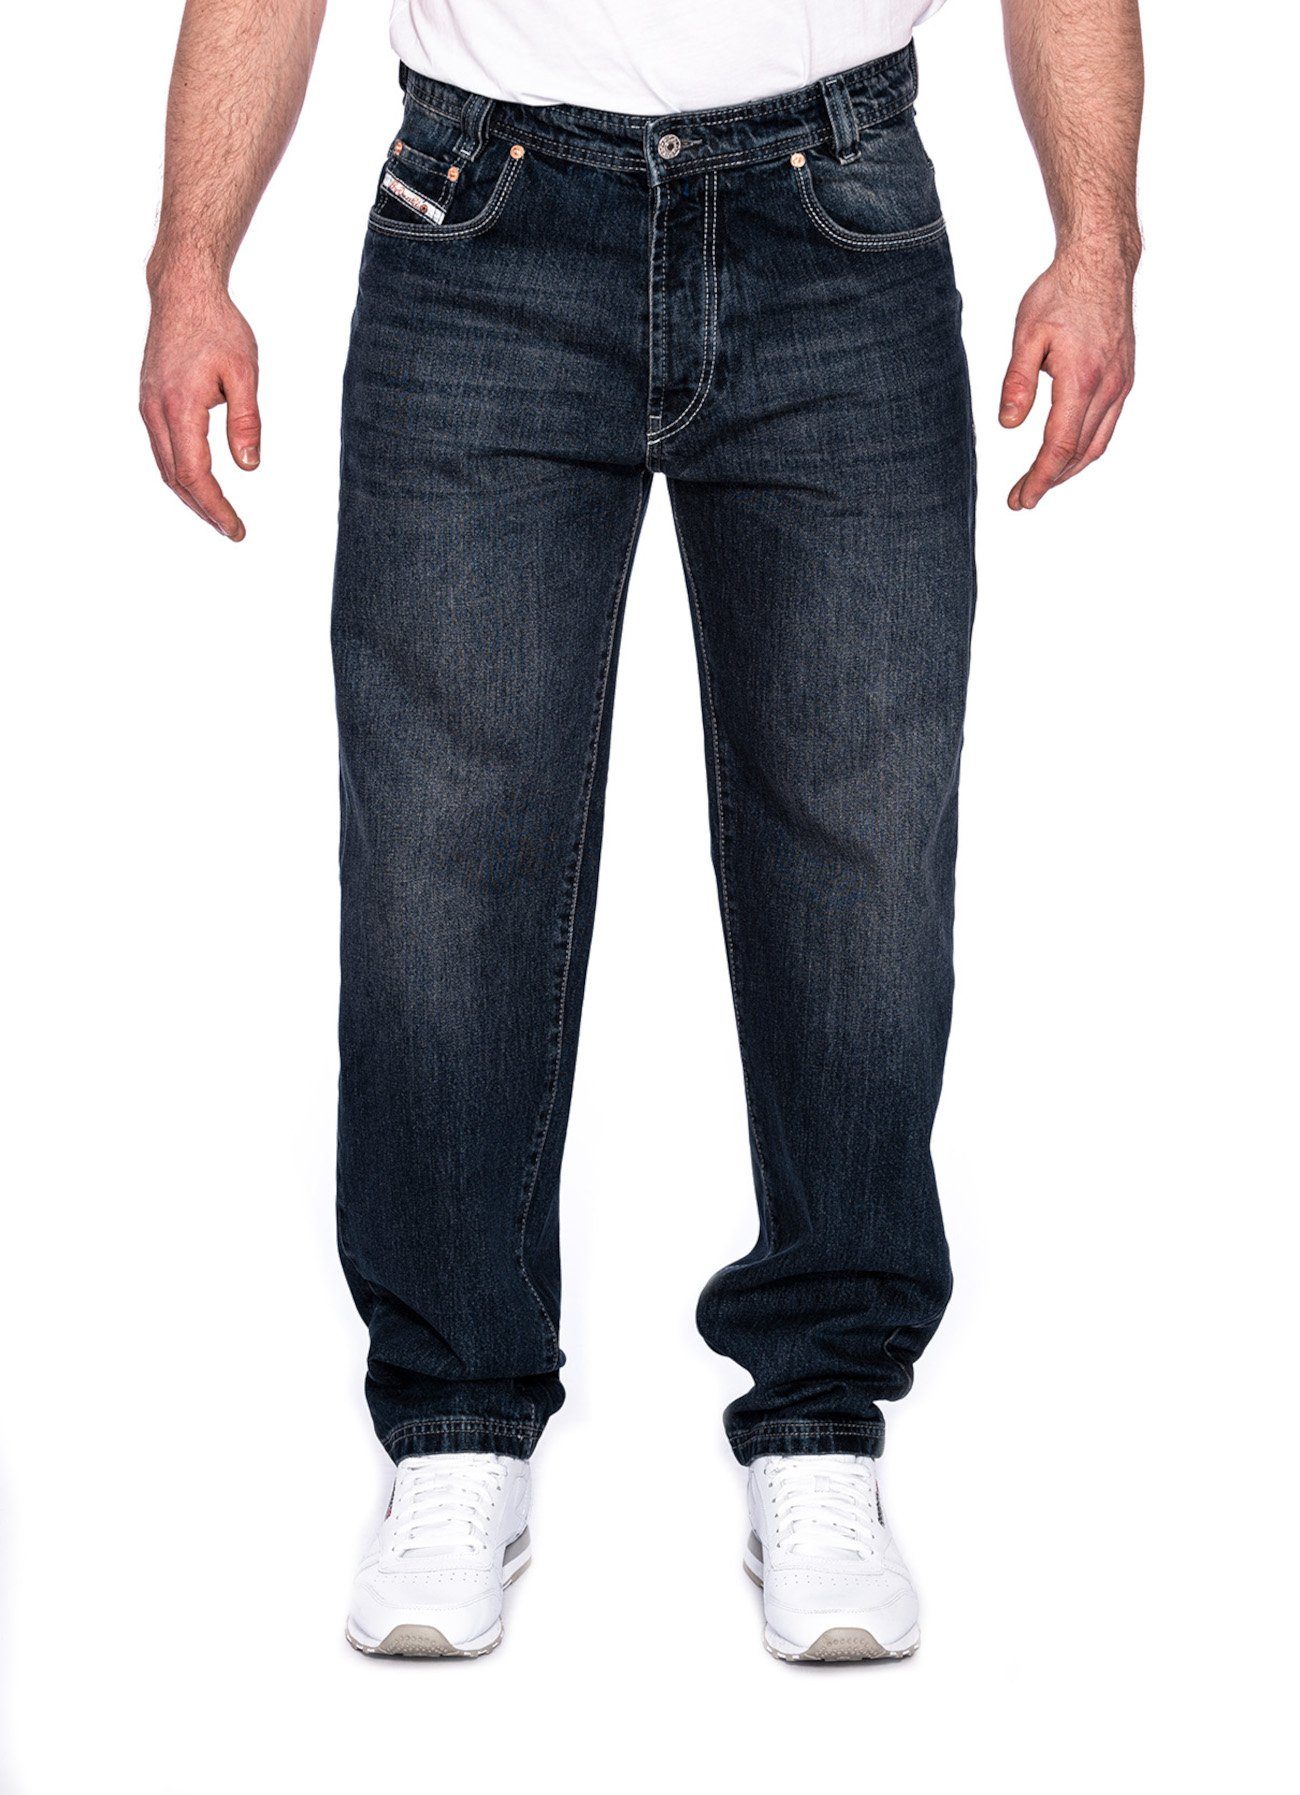 PICALDI Jeans 472 Zicco Fit, Weite Fit Relaxed Indiana Loose Jeans